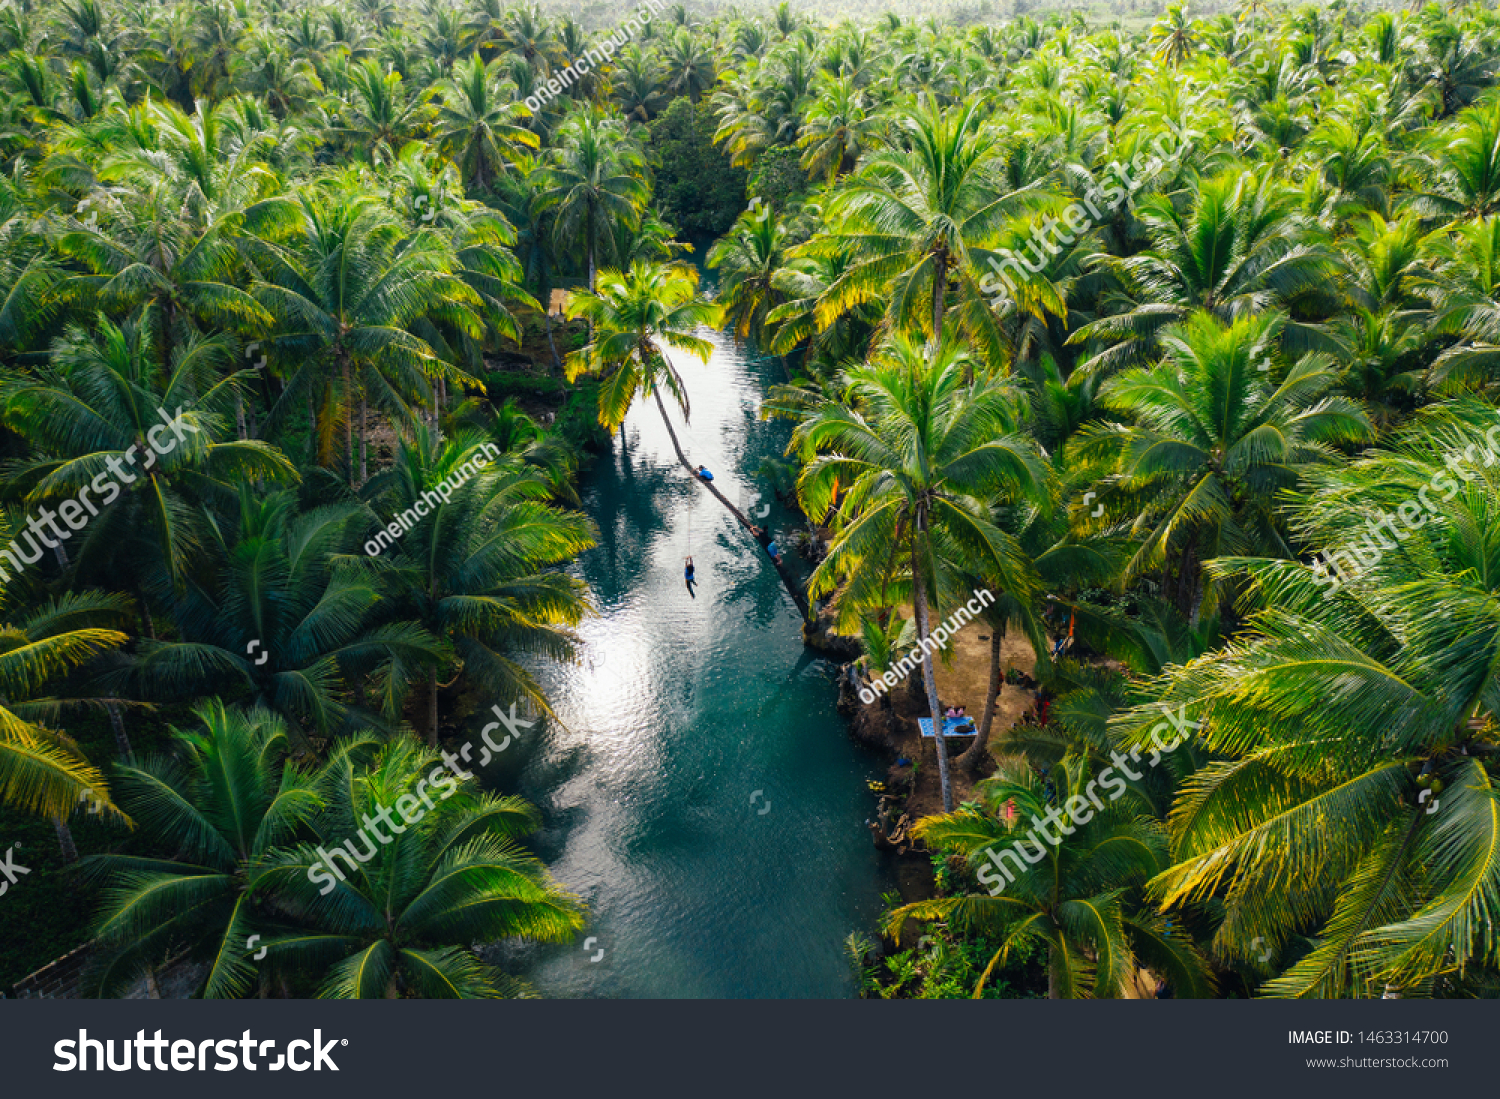 Palm tree jungle in the philippines. concept about wanderlust tropical travels. swinging on the river. People having fun #1463314700